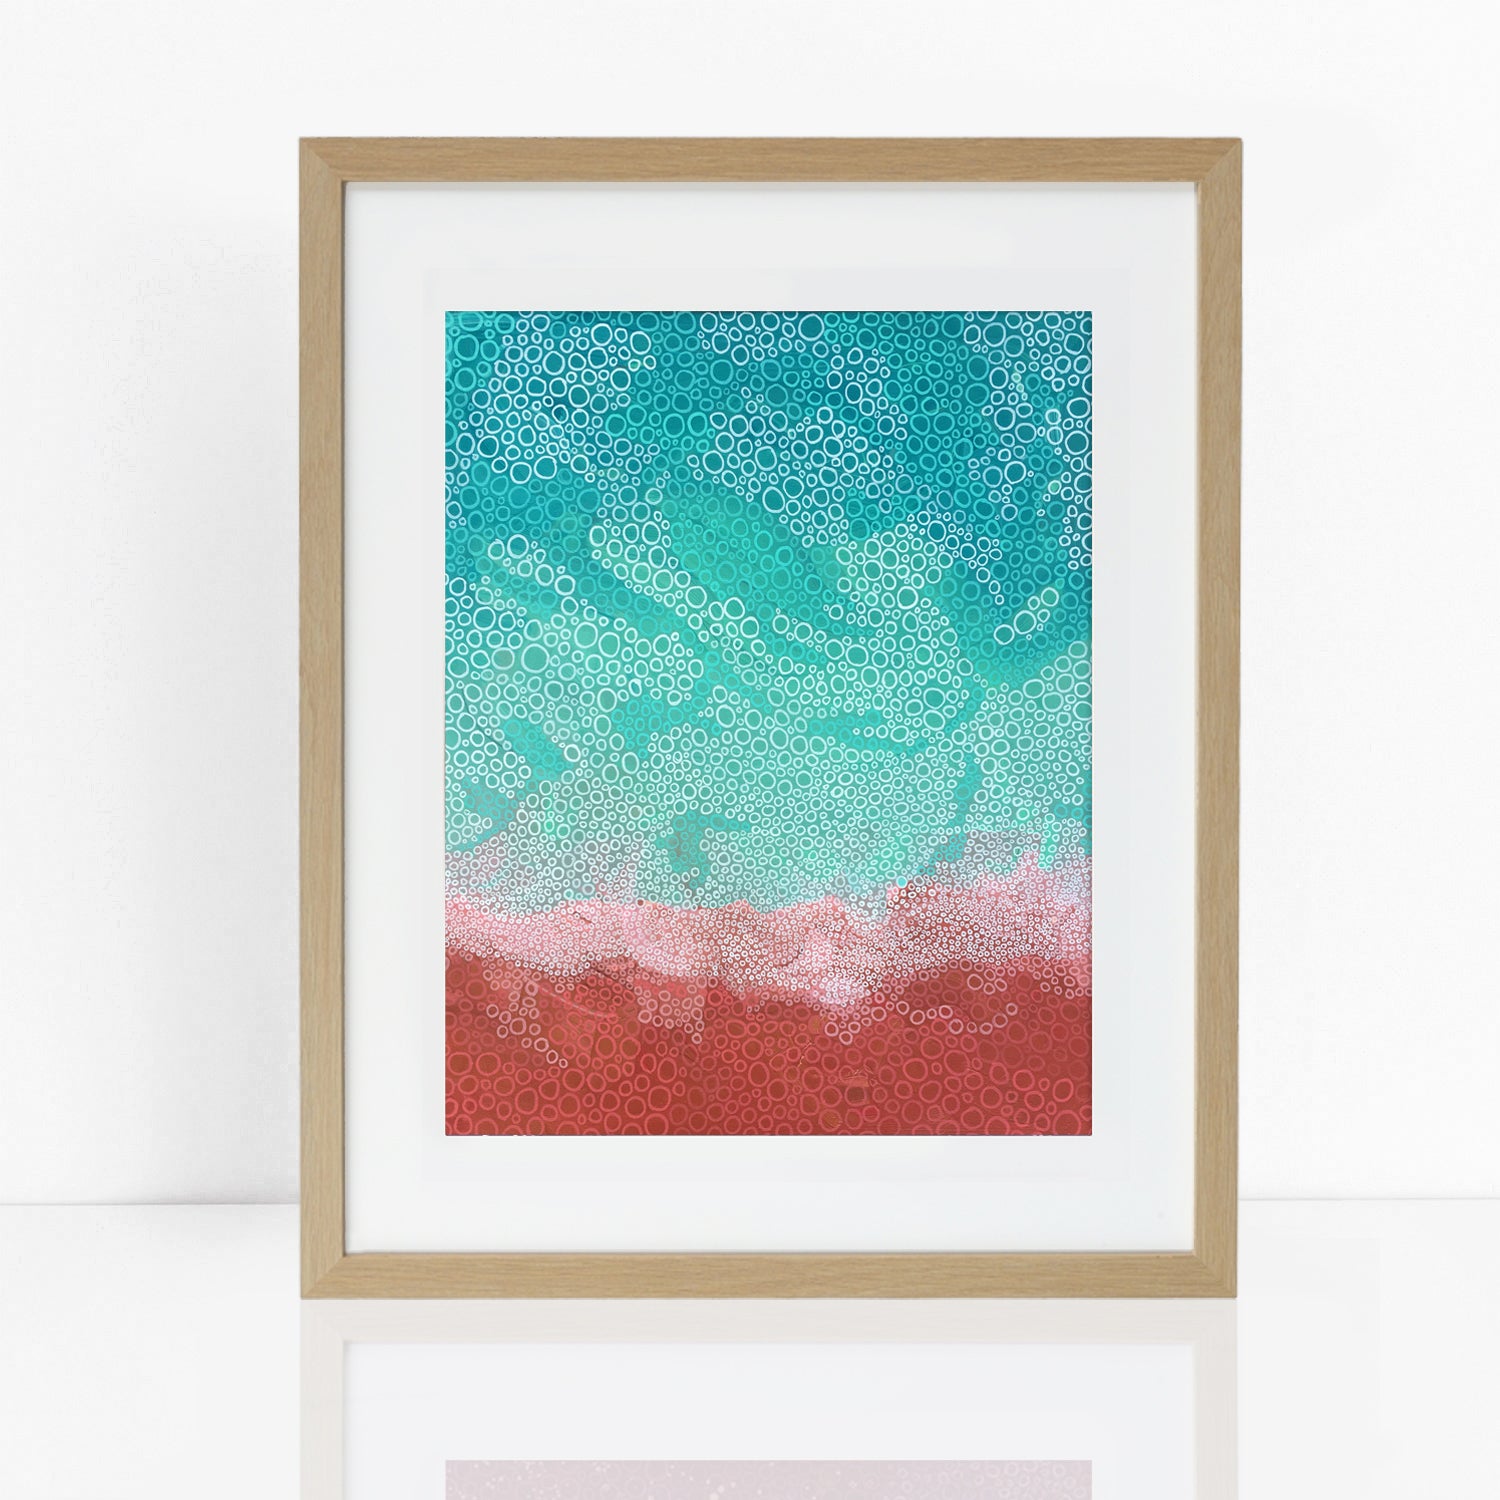 print in frame of abstract Australian coastal image from above with red rocks and aqua sea